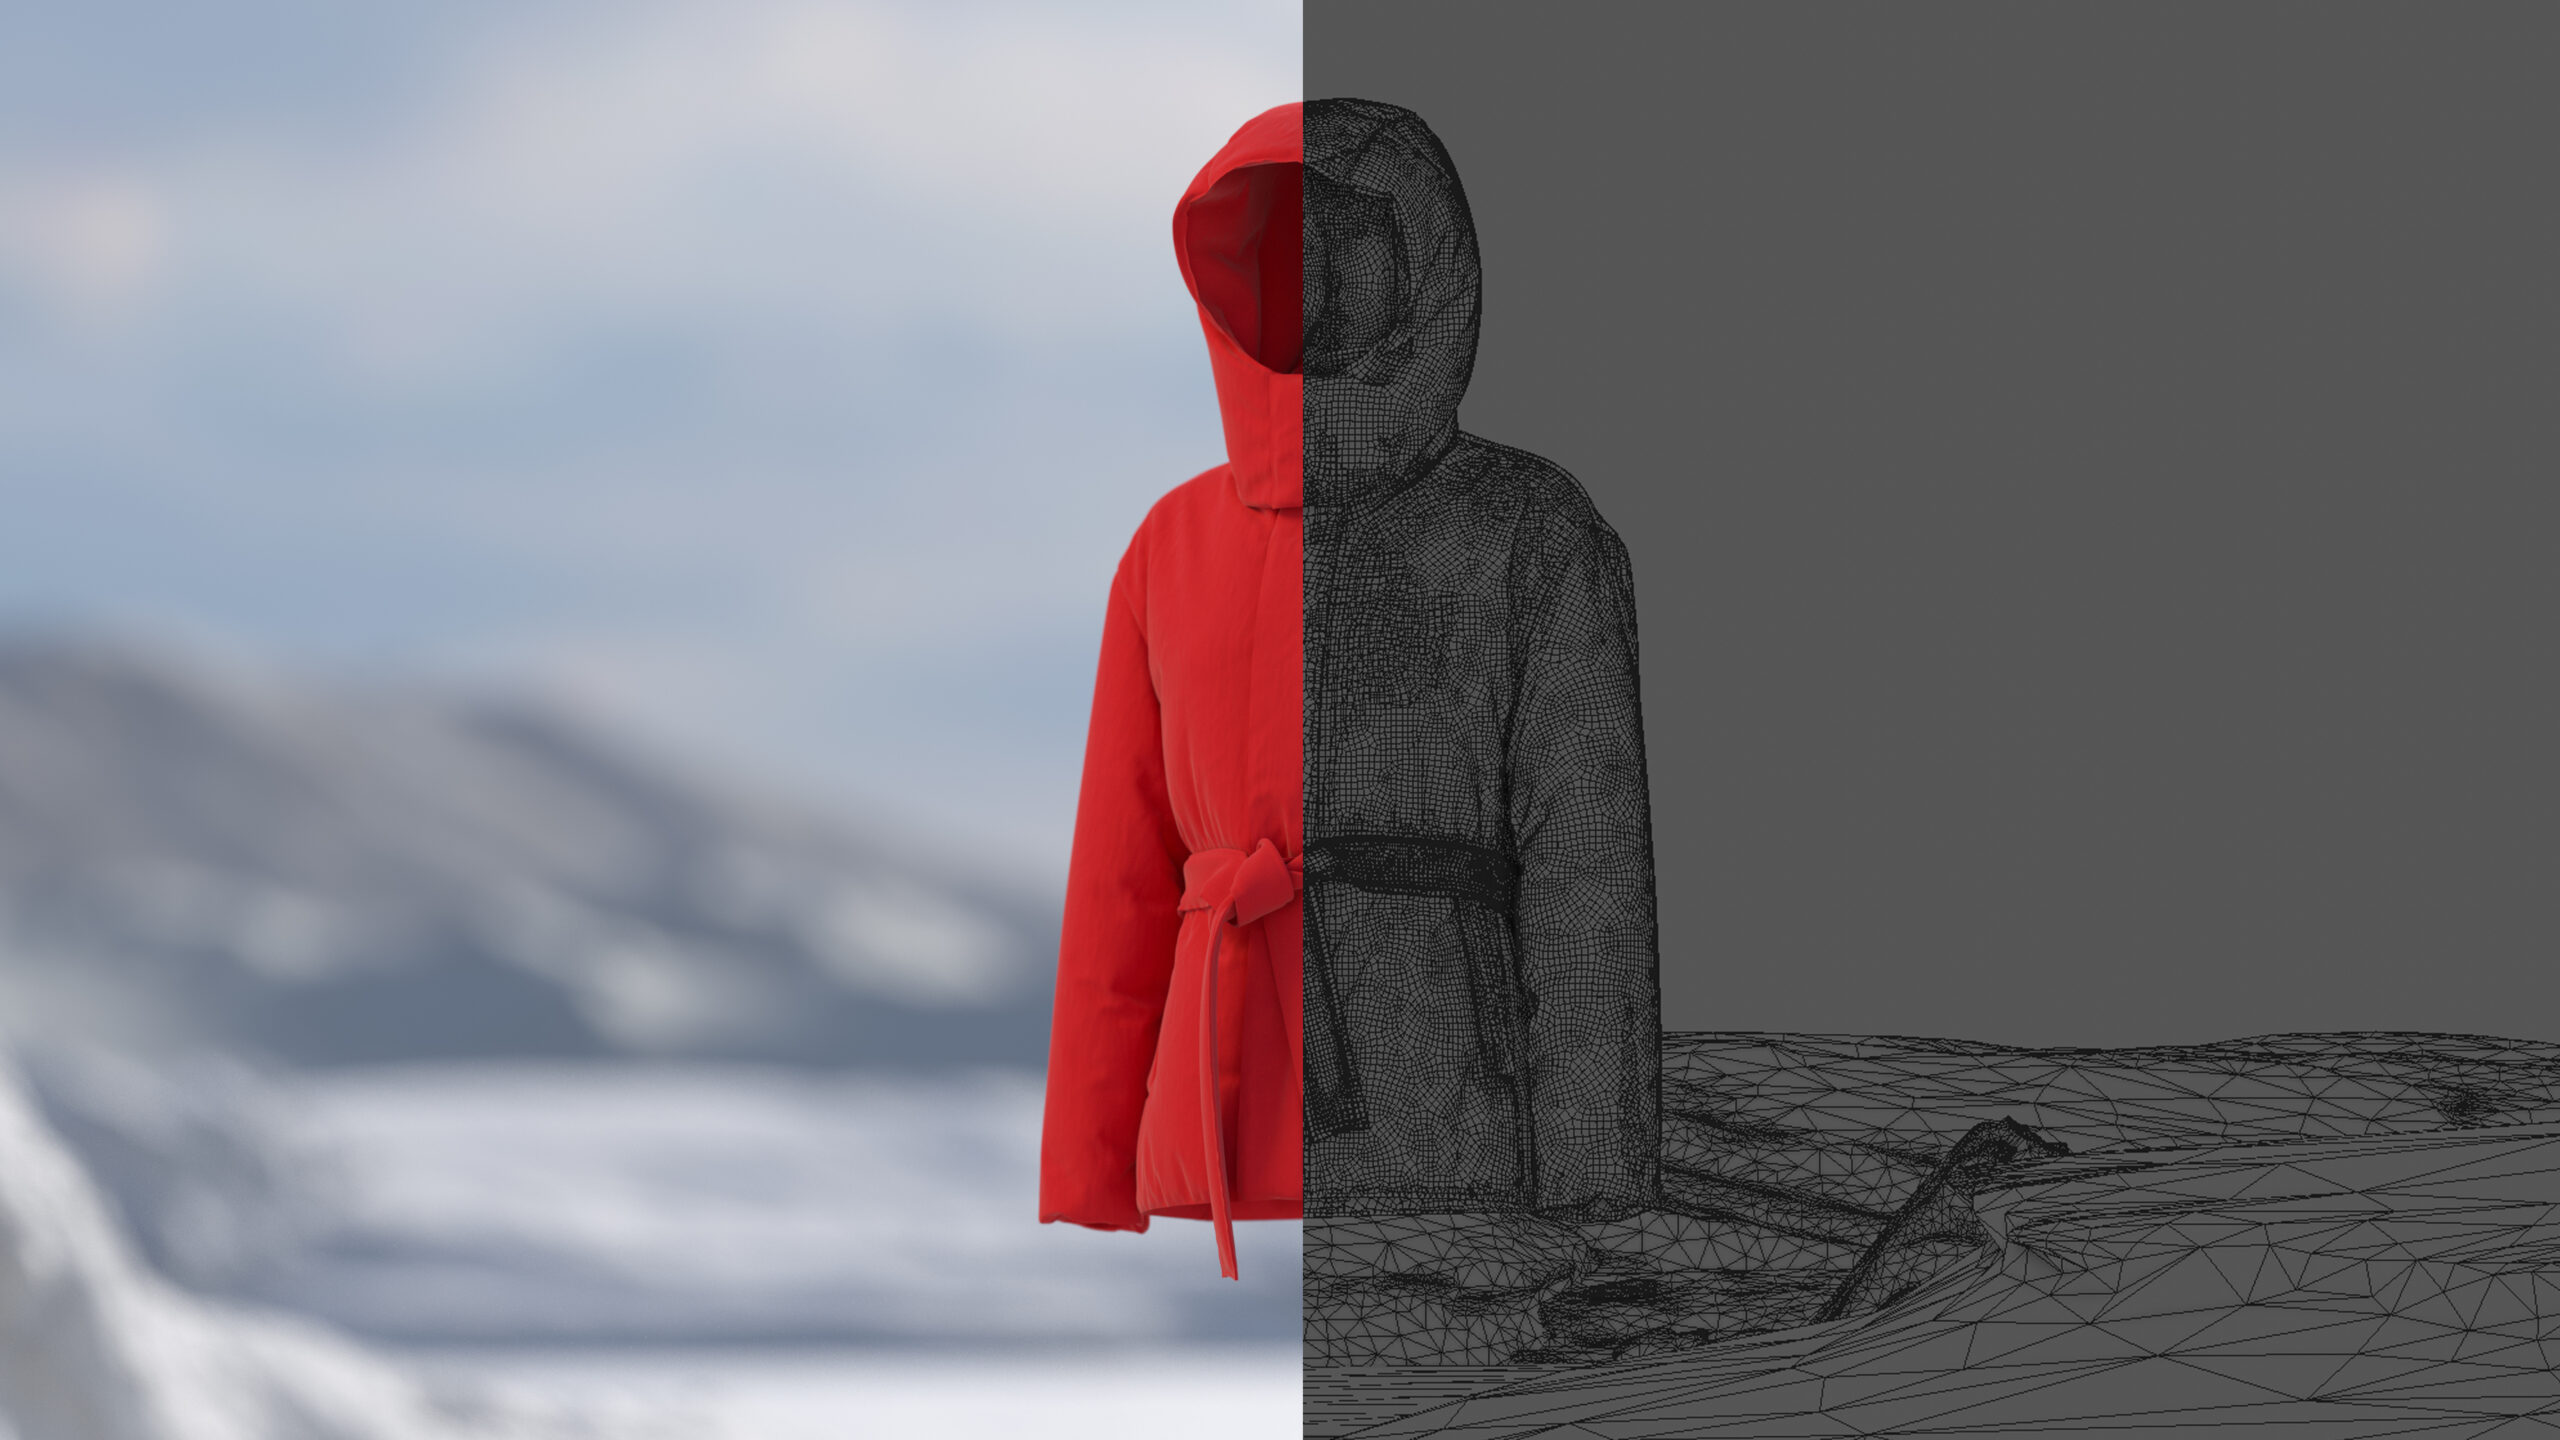 virtual jacket created in unreal engine